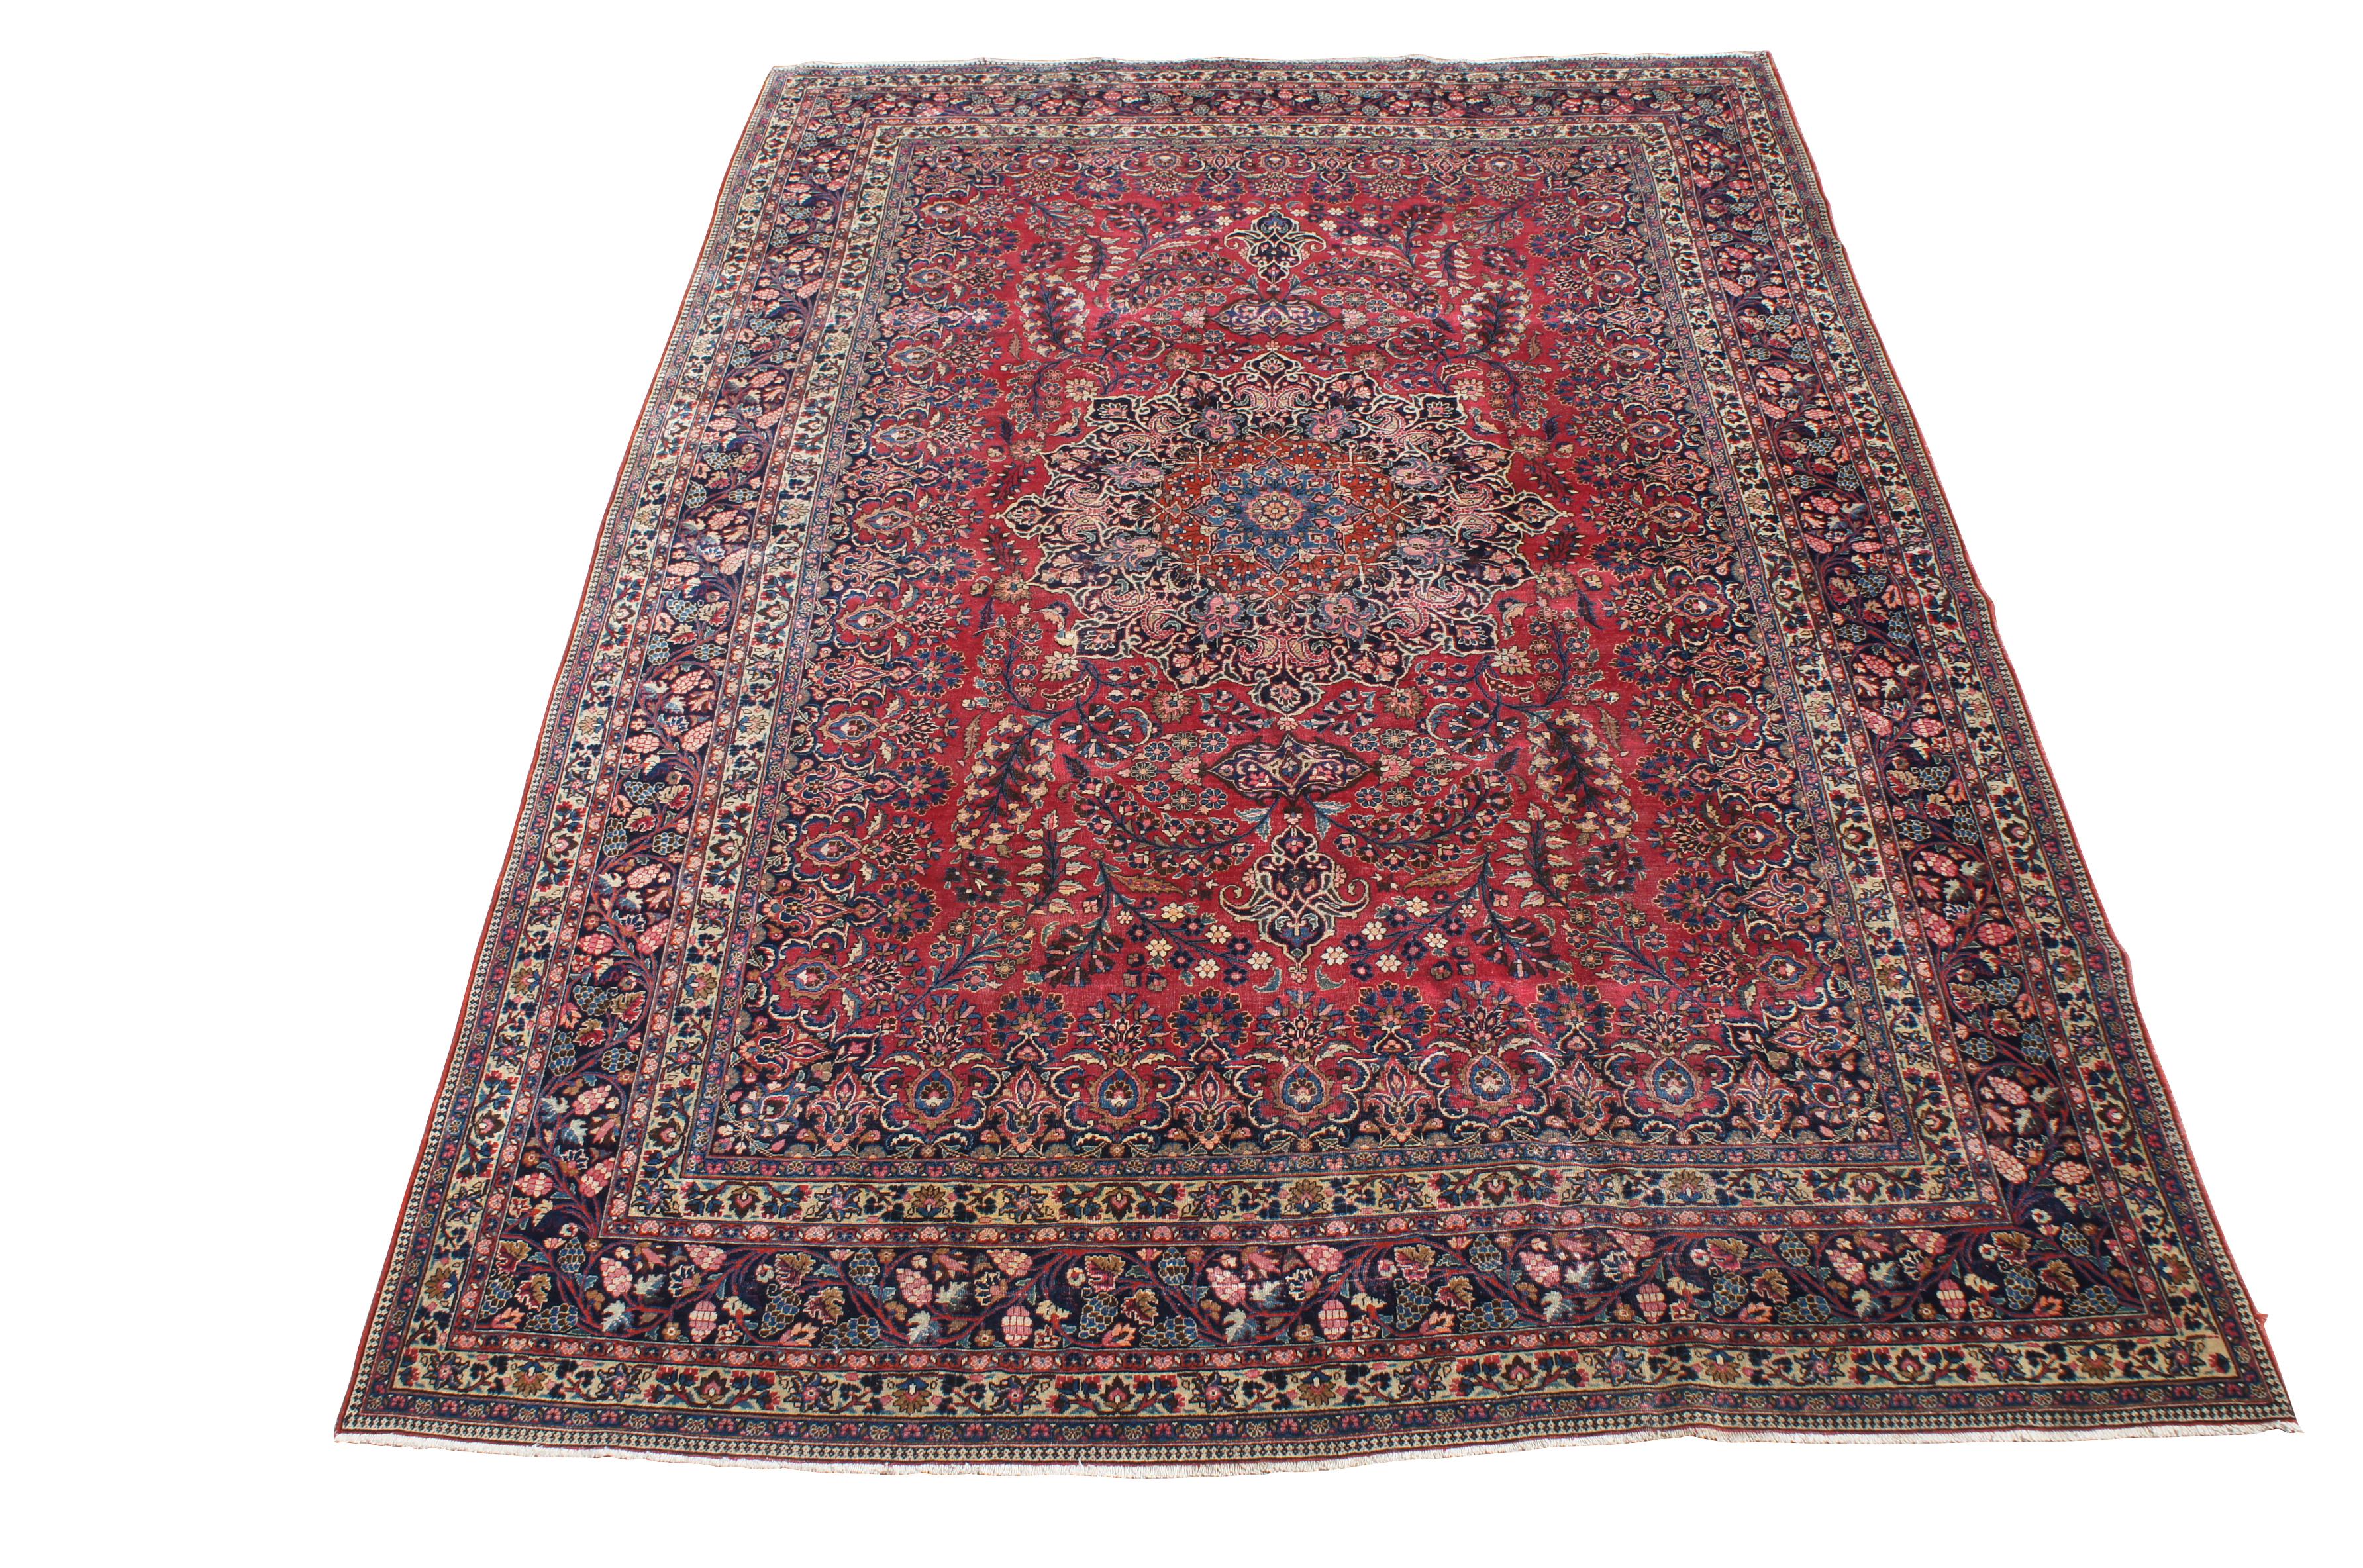 A classic old oriental rug.  Features a tight weave in fine soft wool with deep red and dark blue colors.  The carpet has a brilliant central medallion and is accented my meticulous floral sprays and a layered border with grape vine motif.  144kpsi